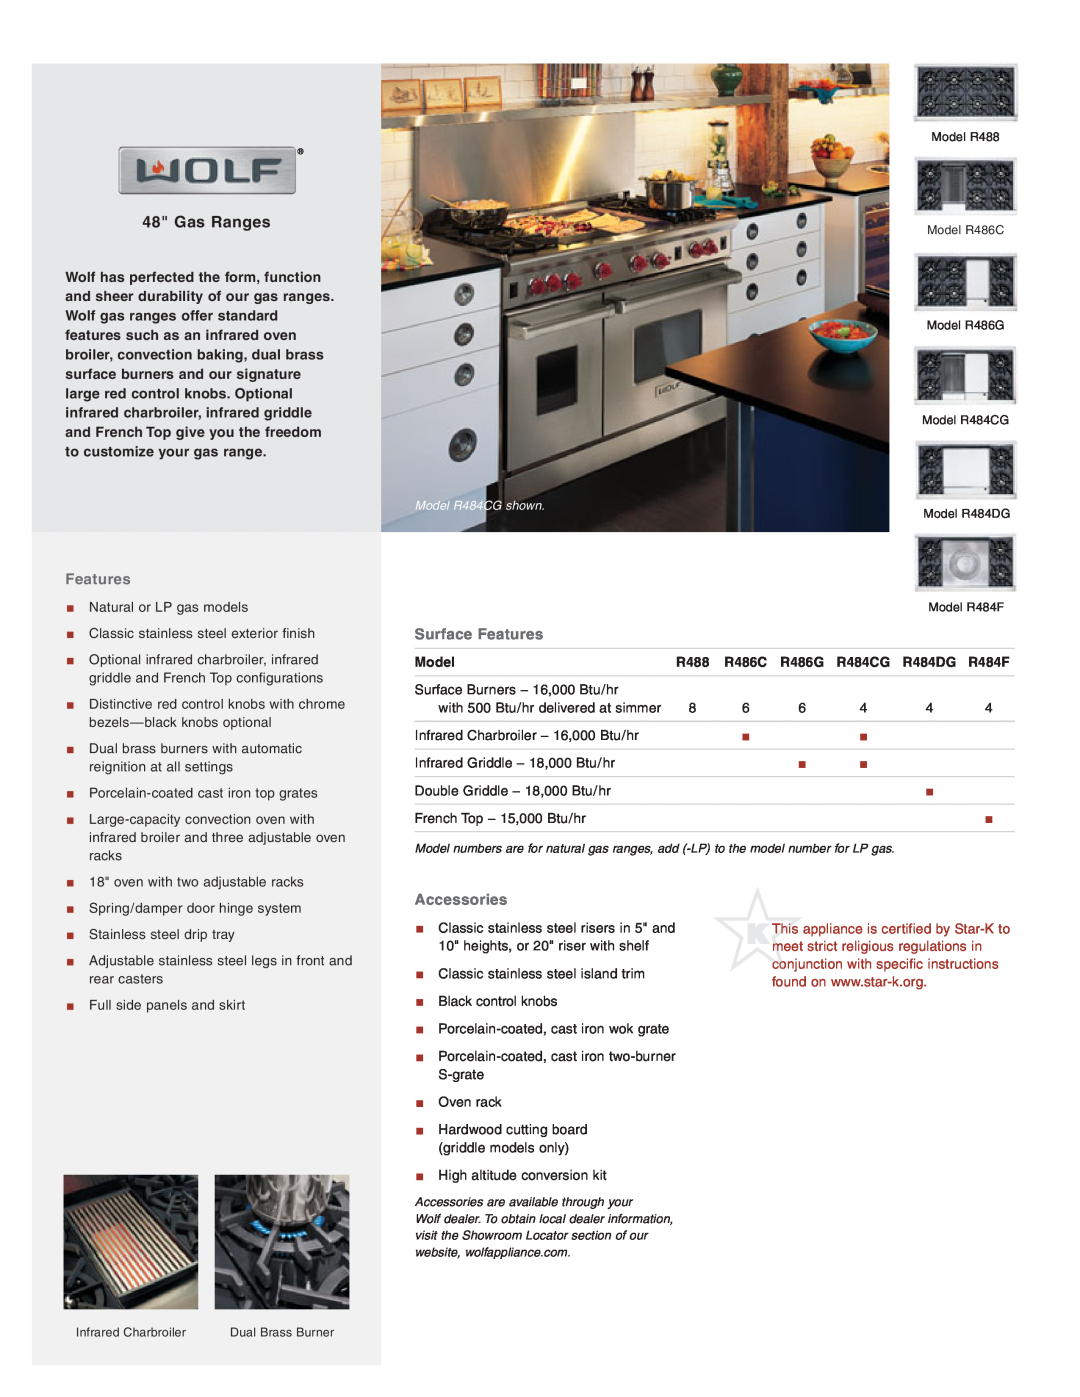 Wolf Appliance Company R484DG manual Gas Ranges, Surface Features, Accessories, Model, R488, R486C, R486G, R484CG 